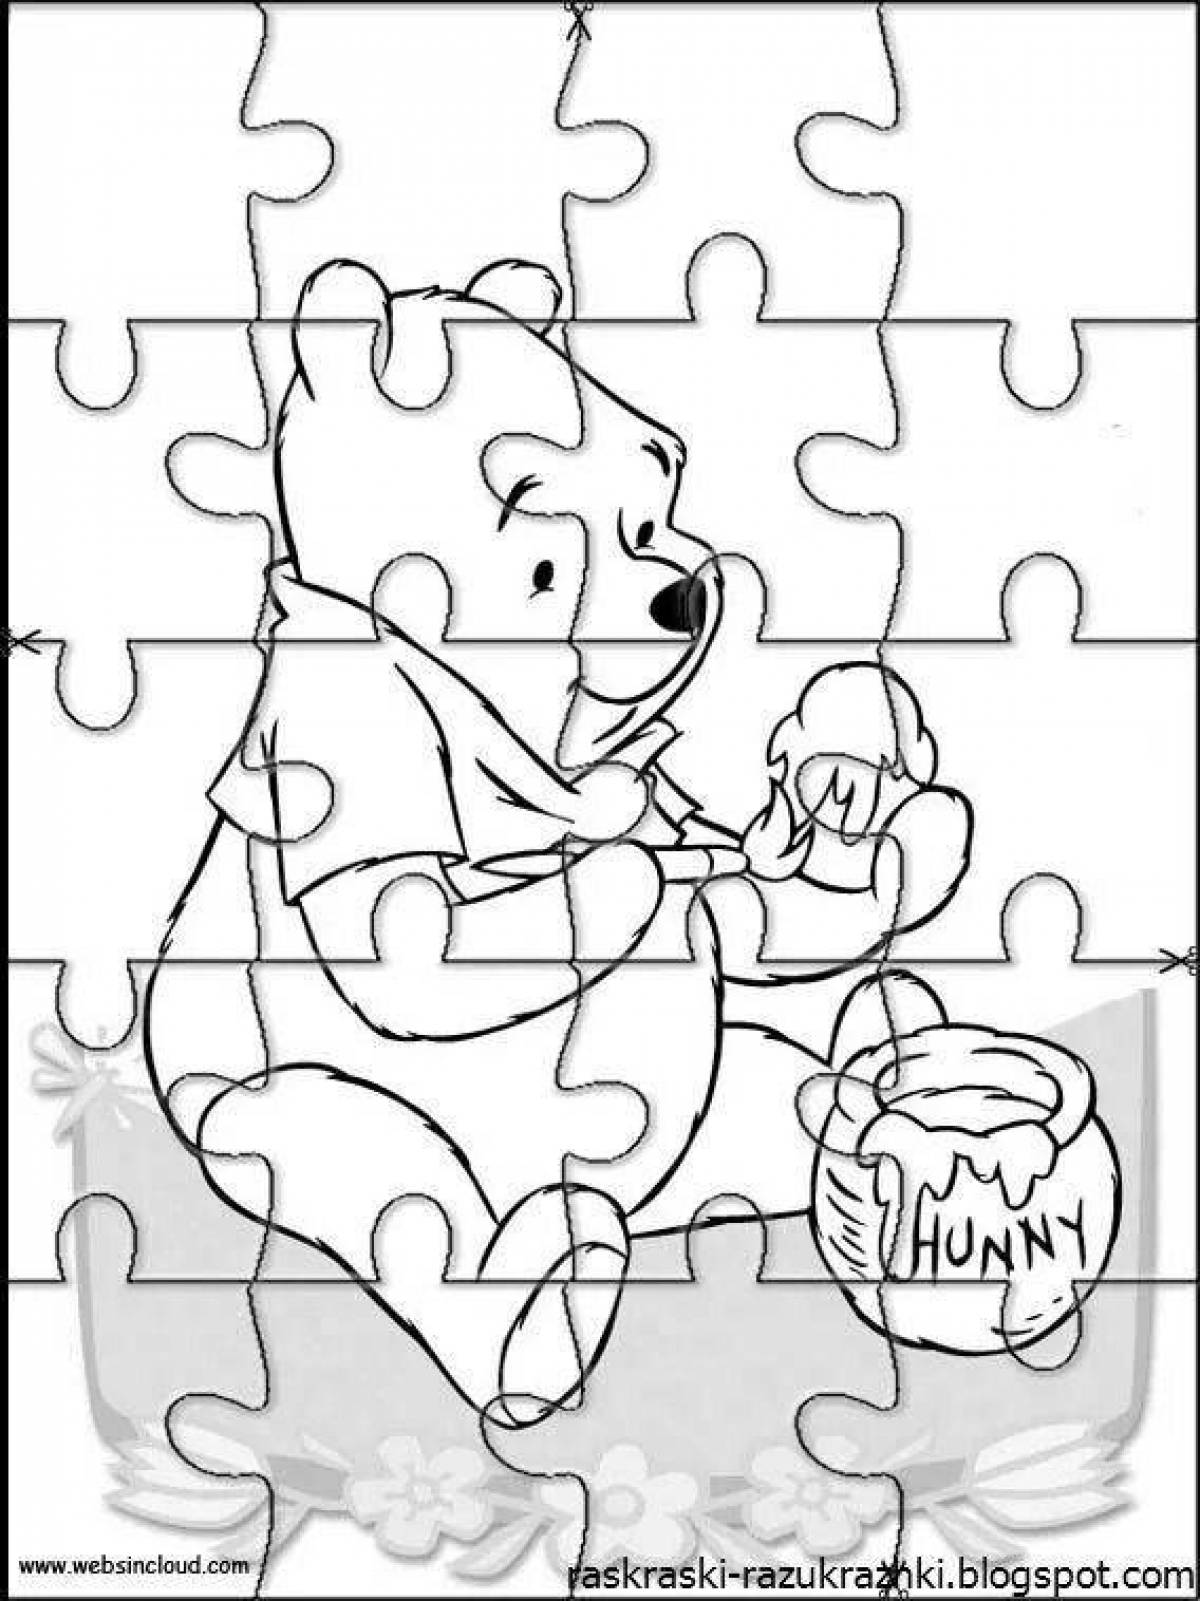 Fascinating puzzle coloring pages